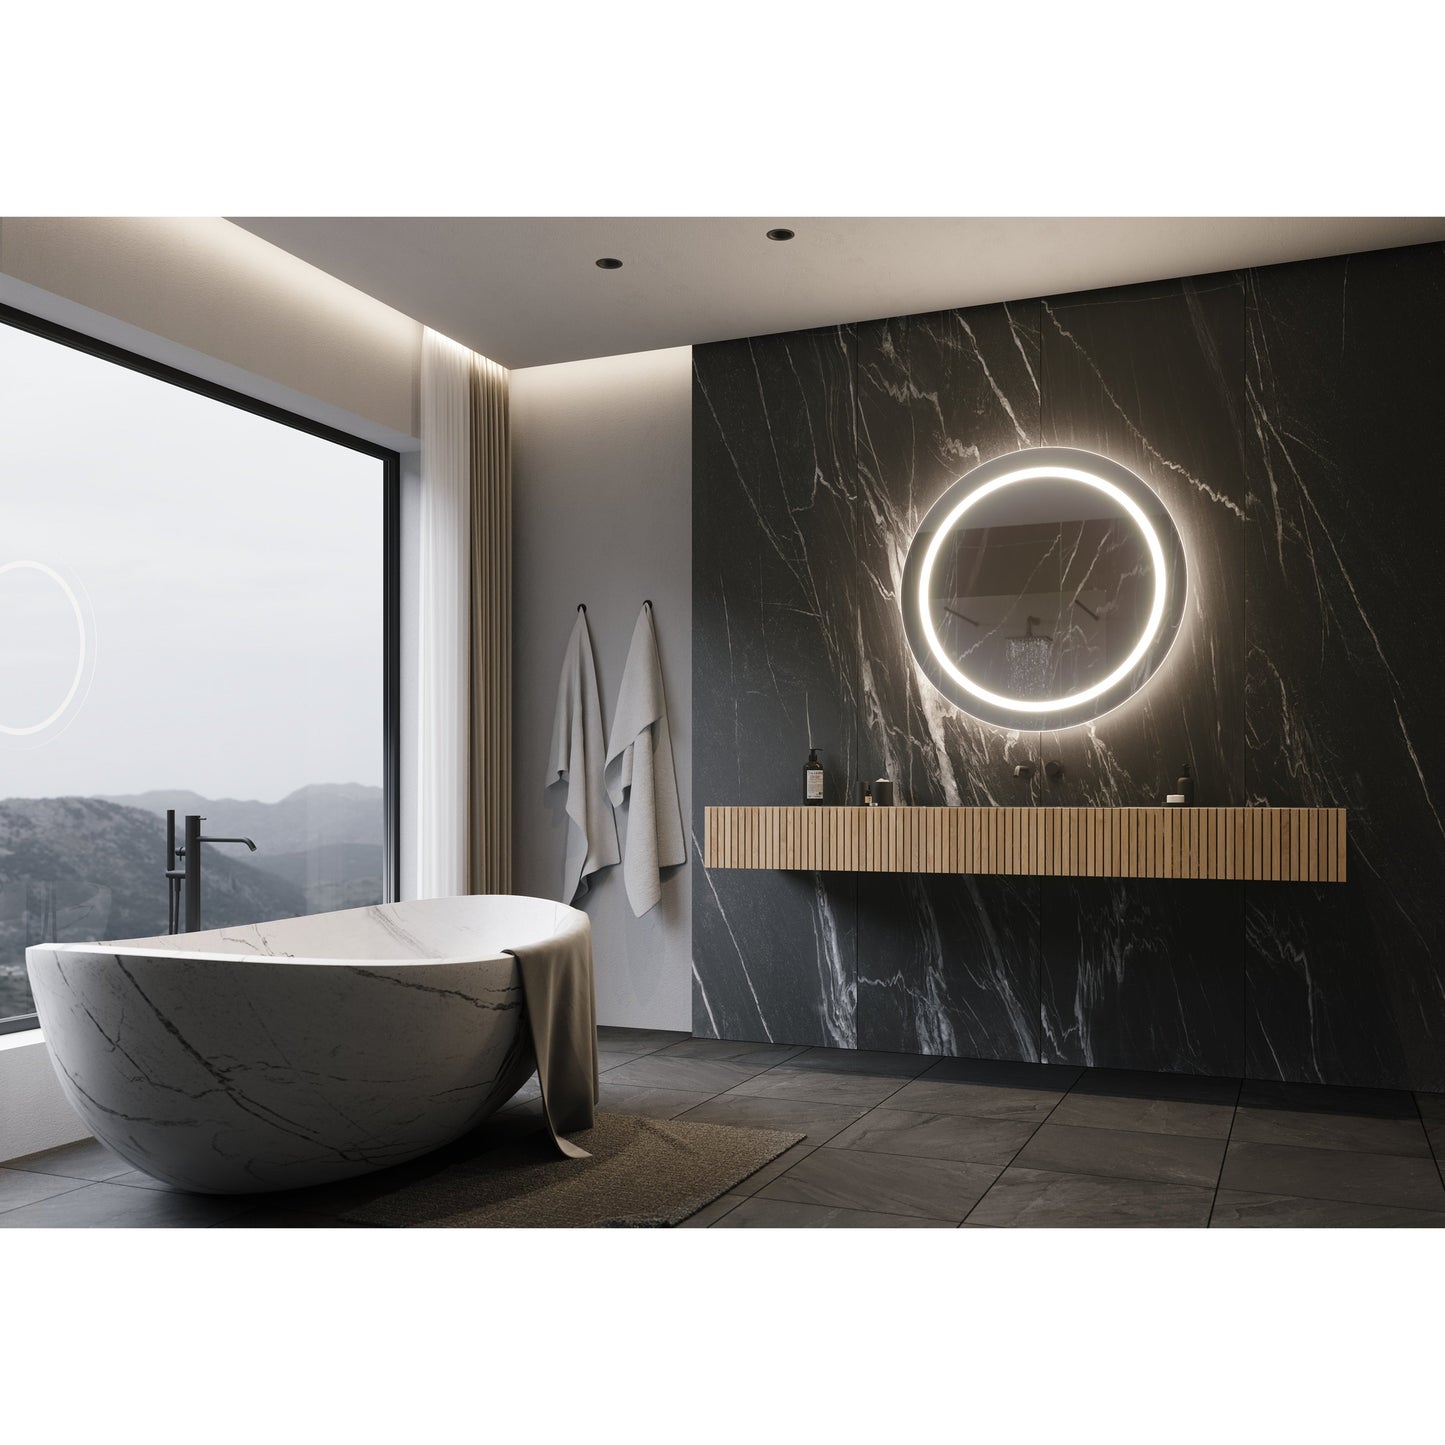 Paris Mirror Harmony Round 36" x 36" Front-Lit Illuminated Super Bright Dimmable Wall-Mounted 6000K LED Mirror With Polished Edges